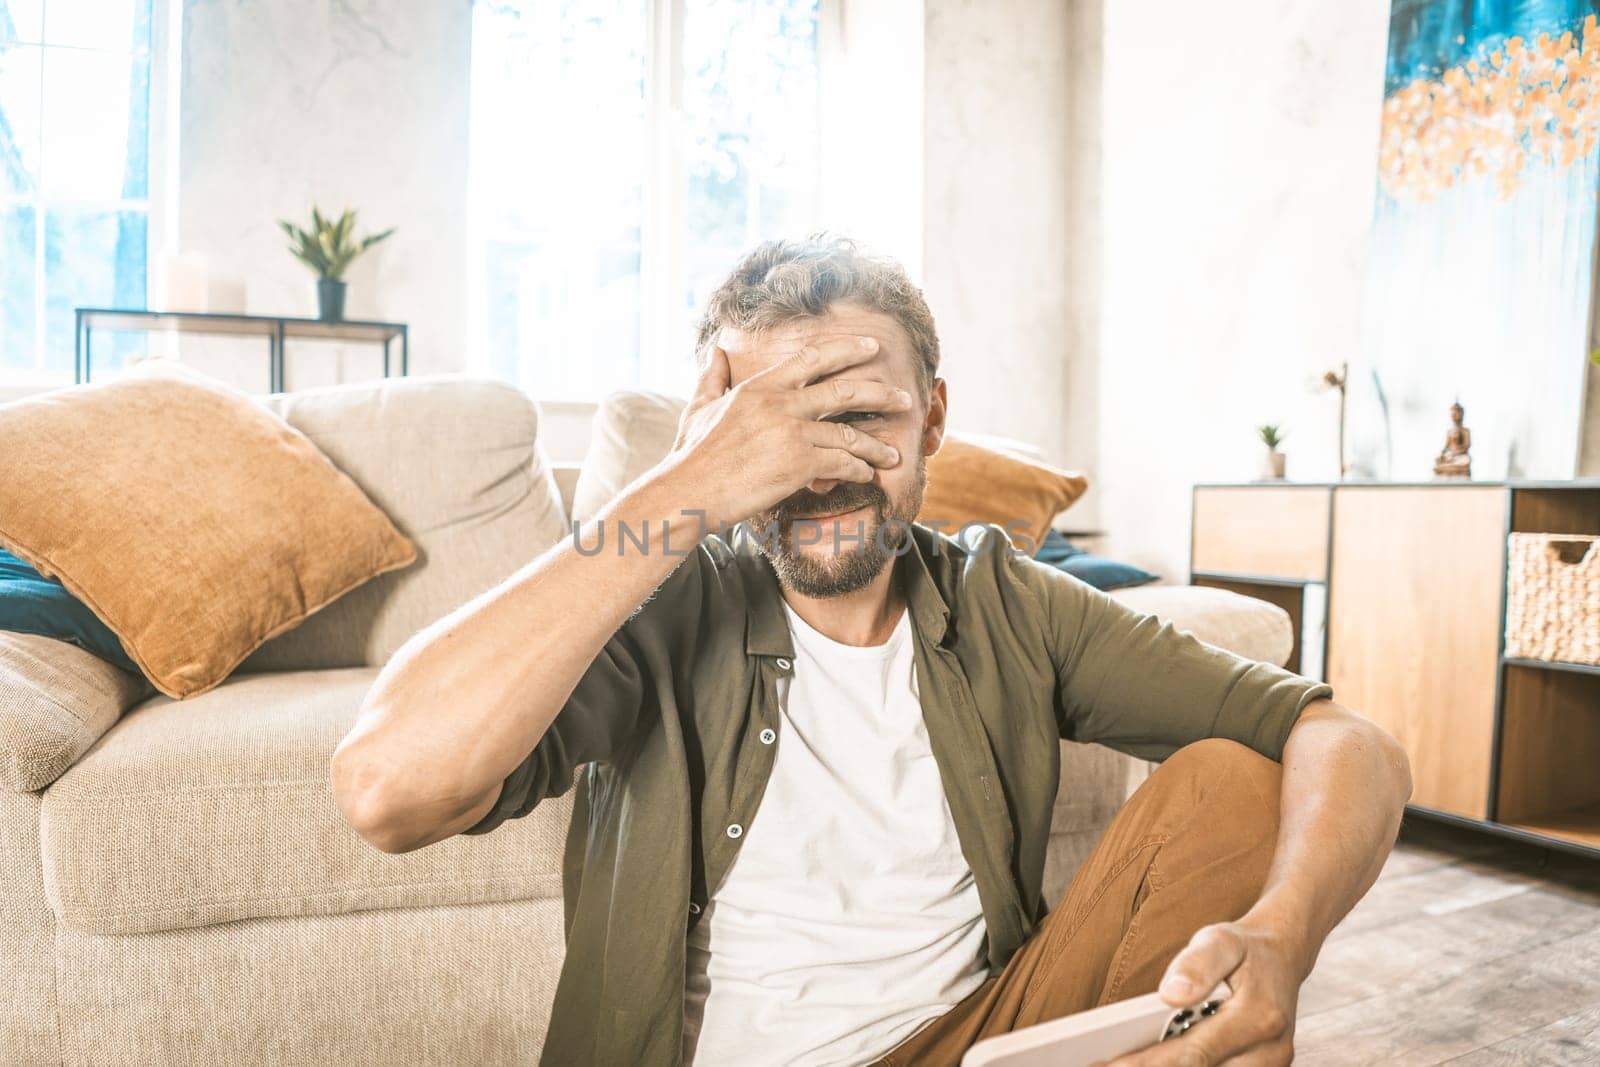 Cheater online. Man covering face with facepalm, holding mobile phone. Hacker concept. He may have been caught doing something wrong or possibly caught in act of hacking or online fraud. High quality photo